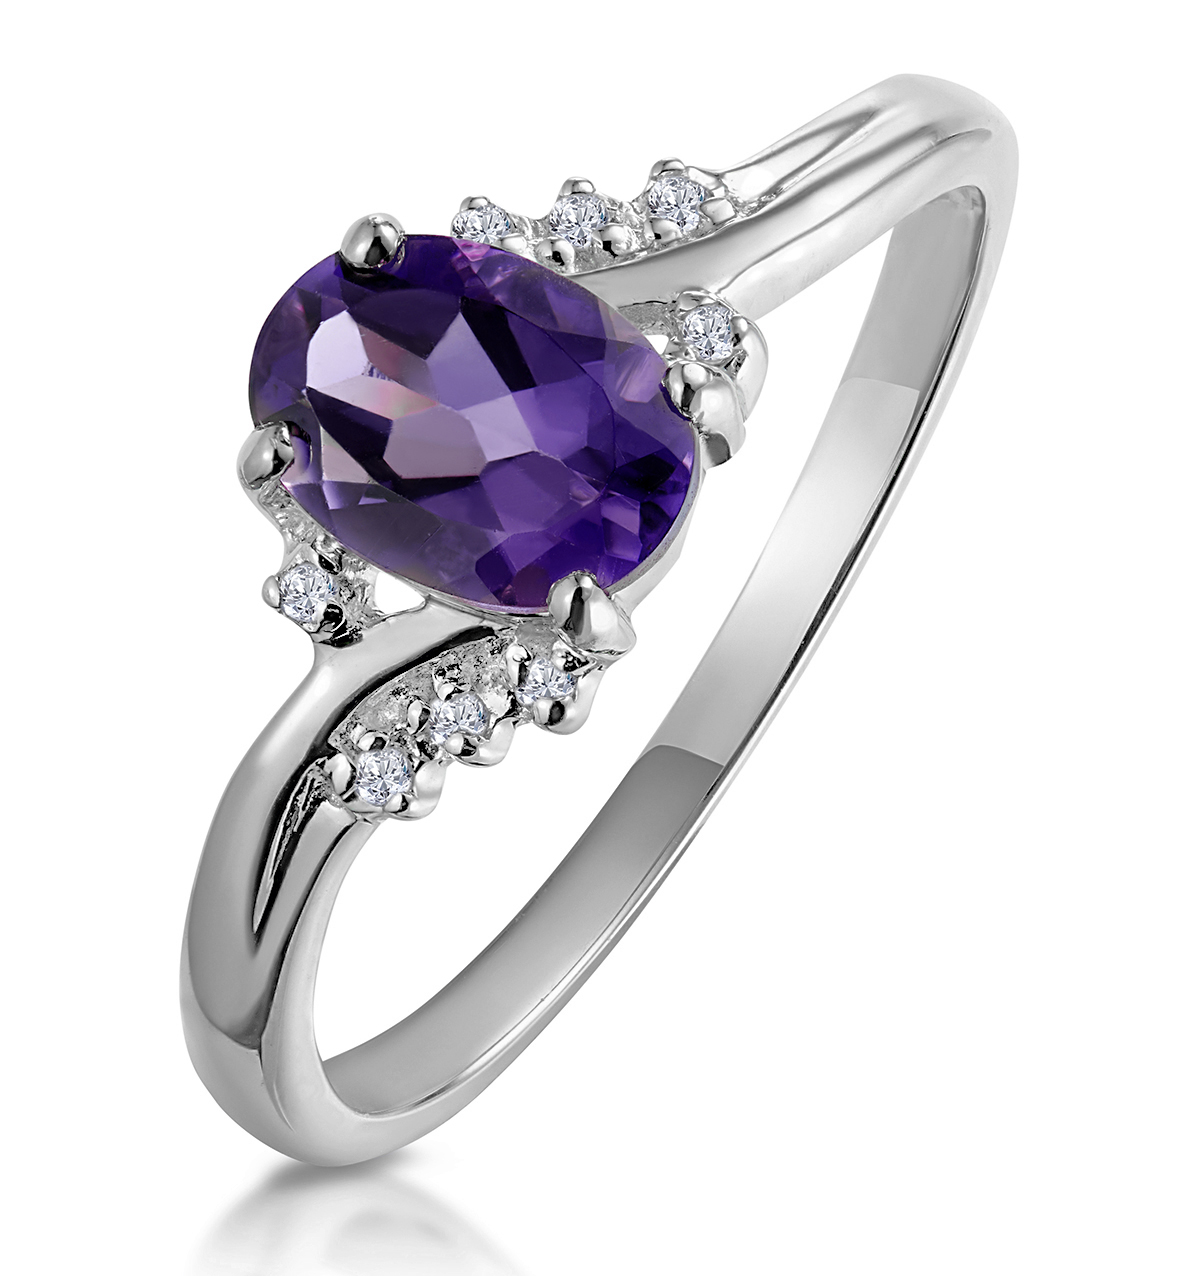 Over 60 items of amethyst jewellery from The Diamond Store